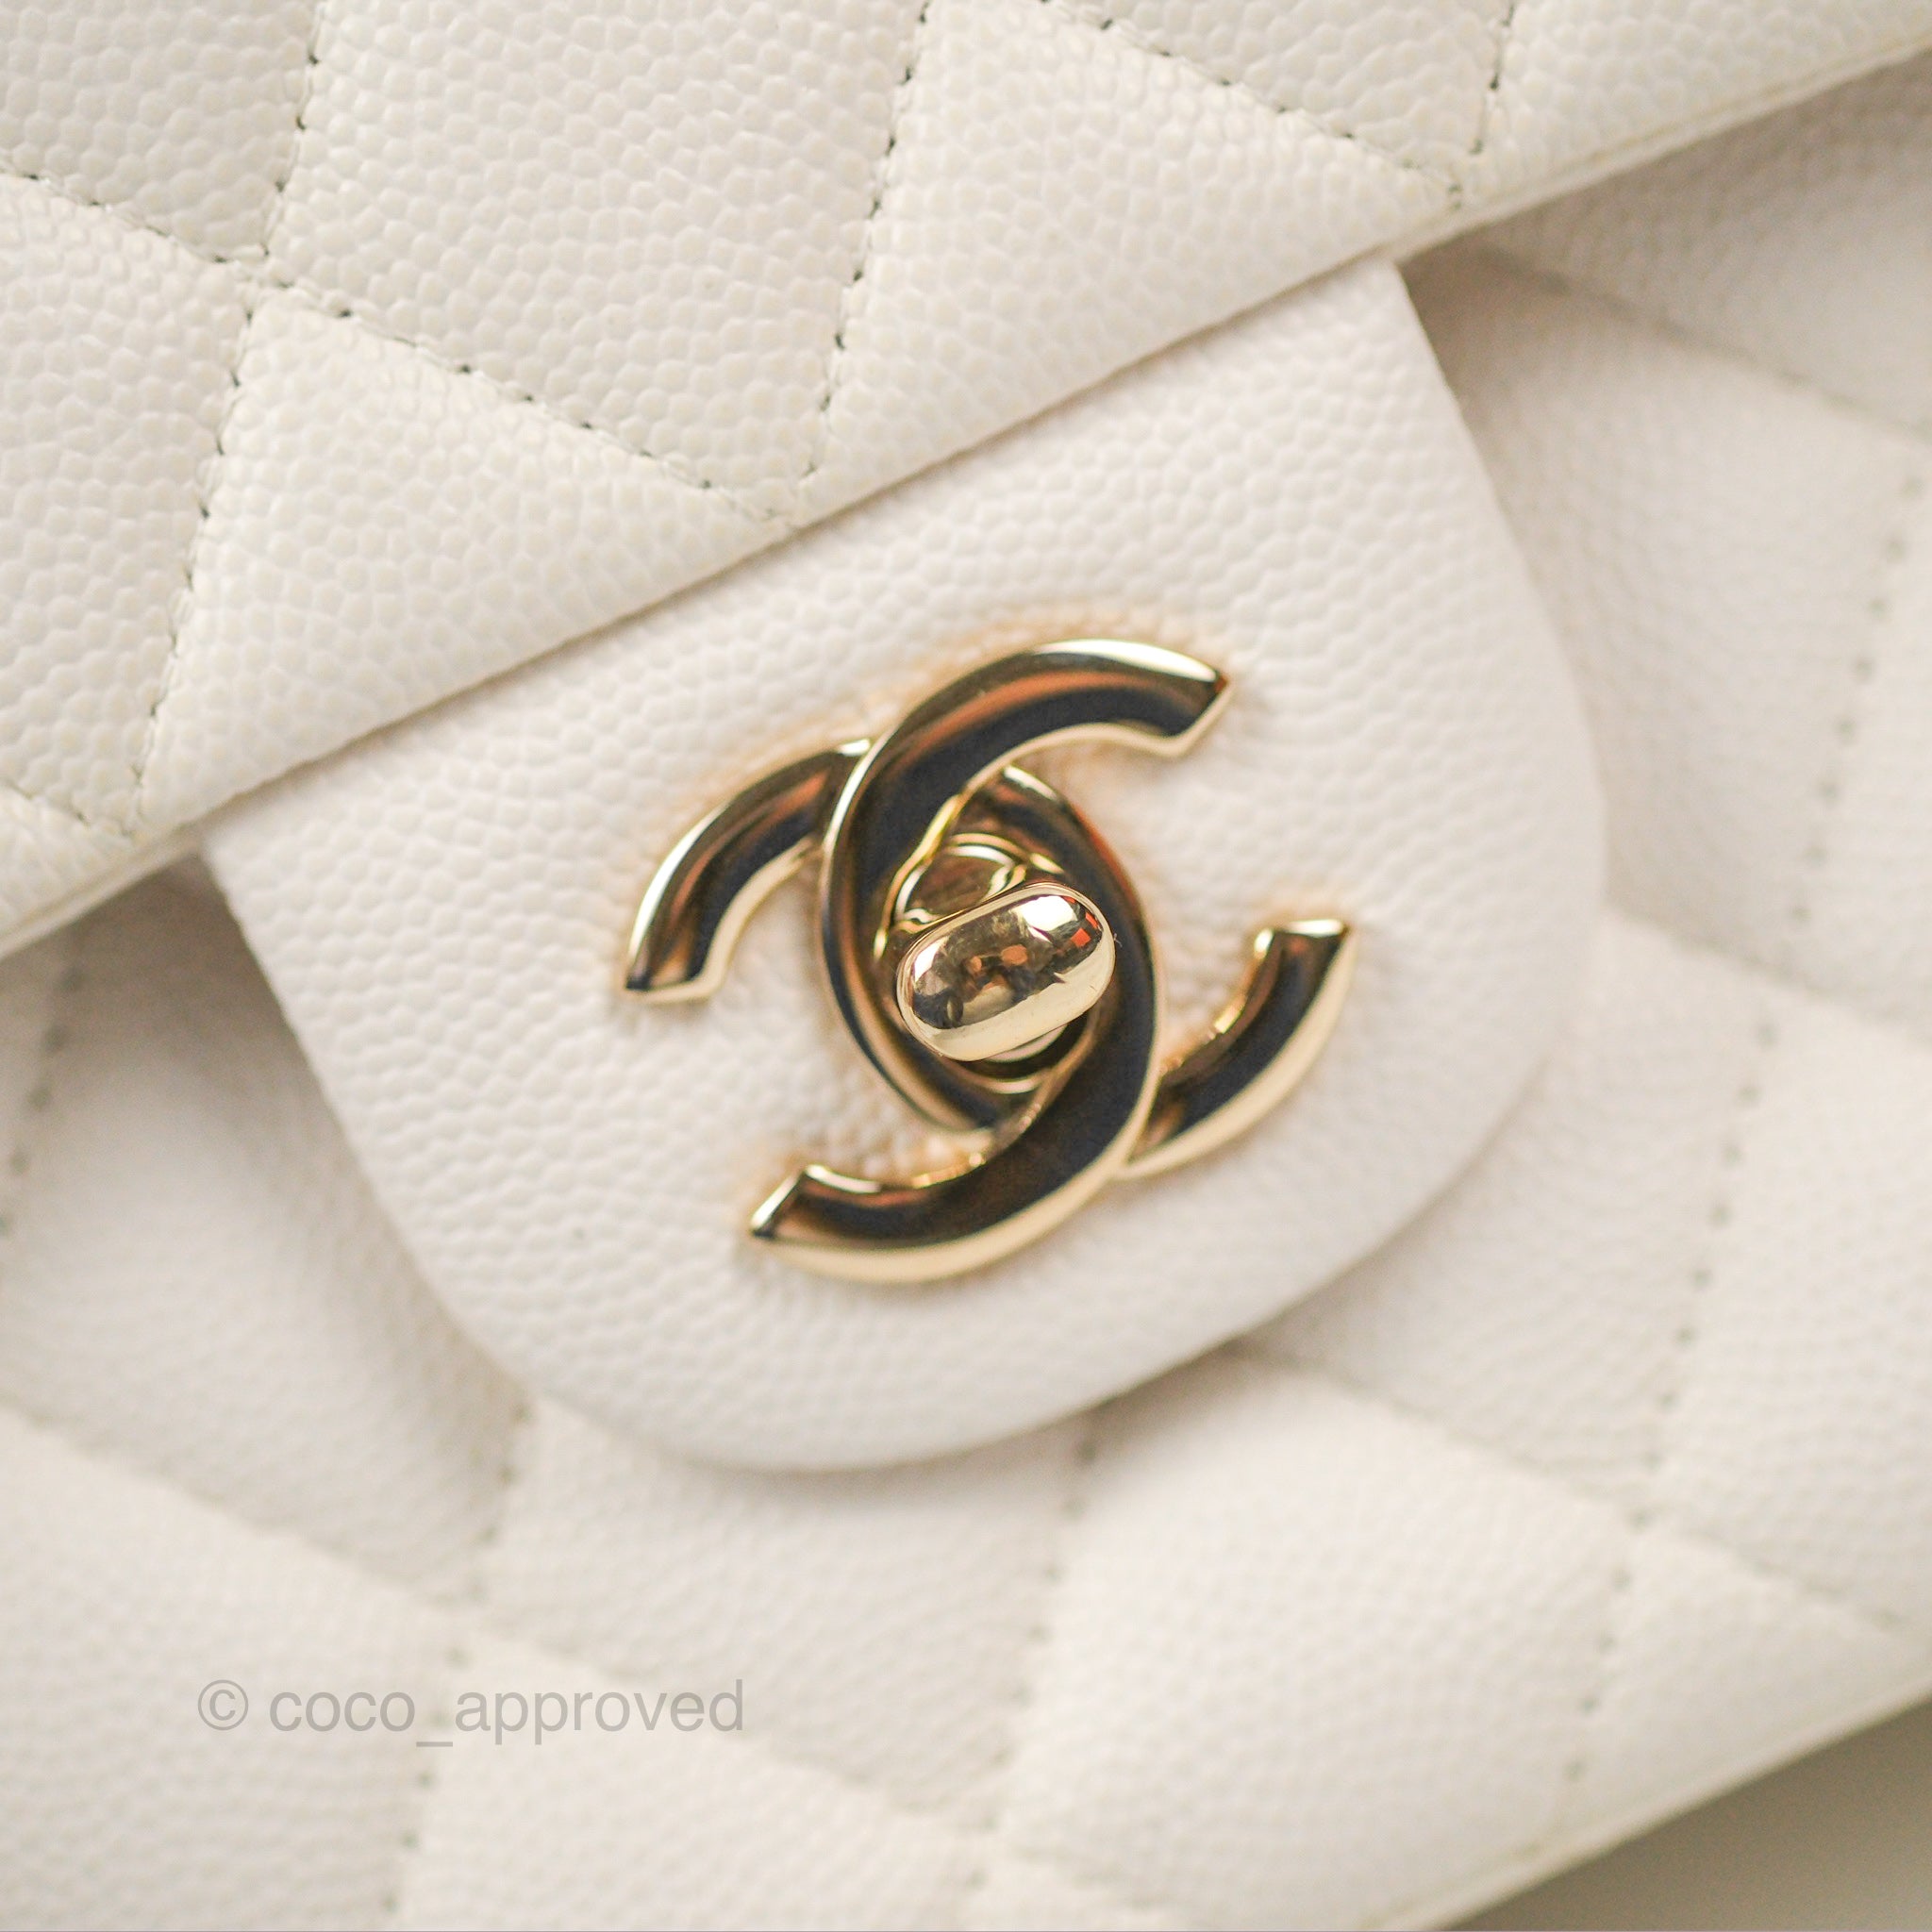 Chanel Cream White Quilted Caviar Small Classic Double Flap Gold